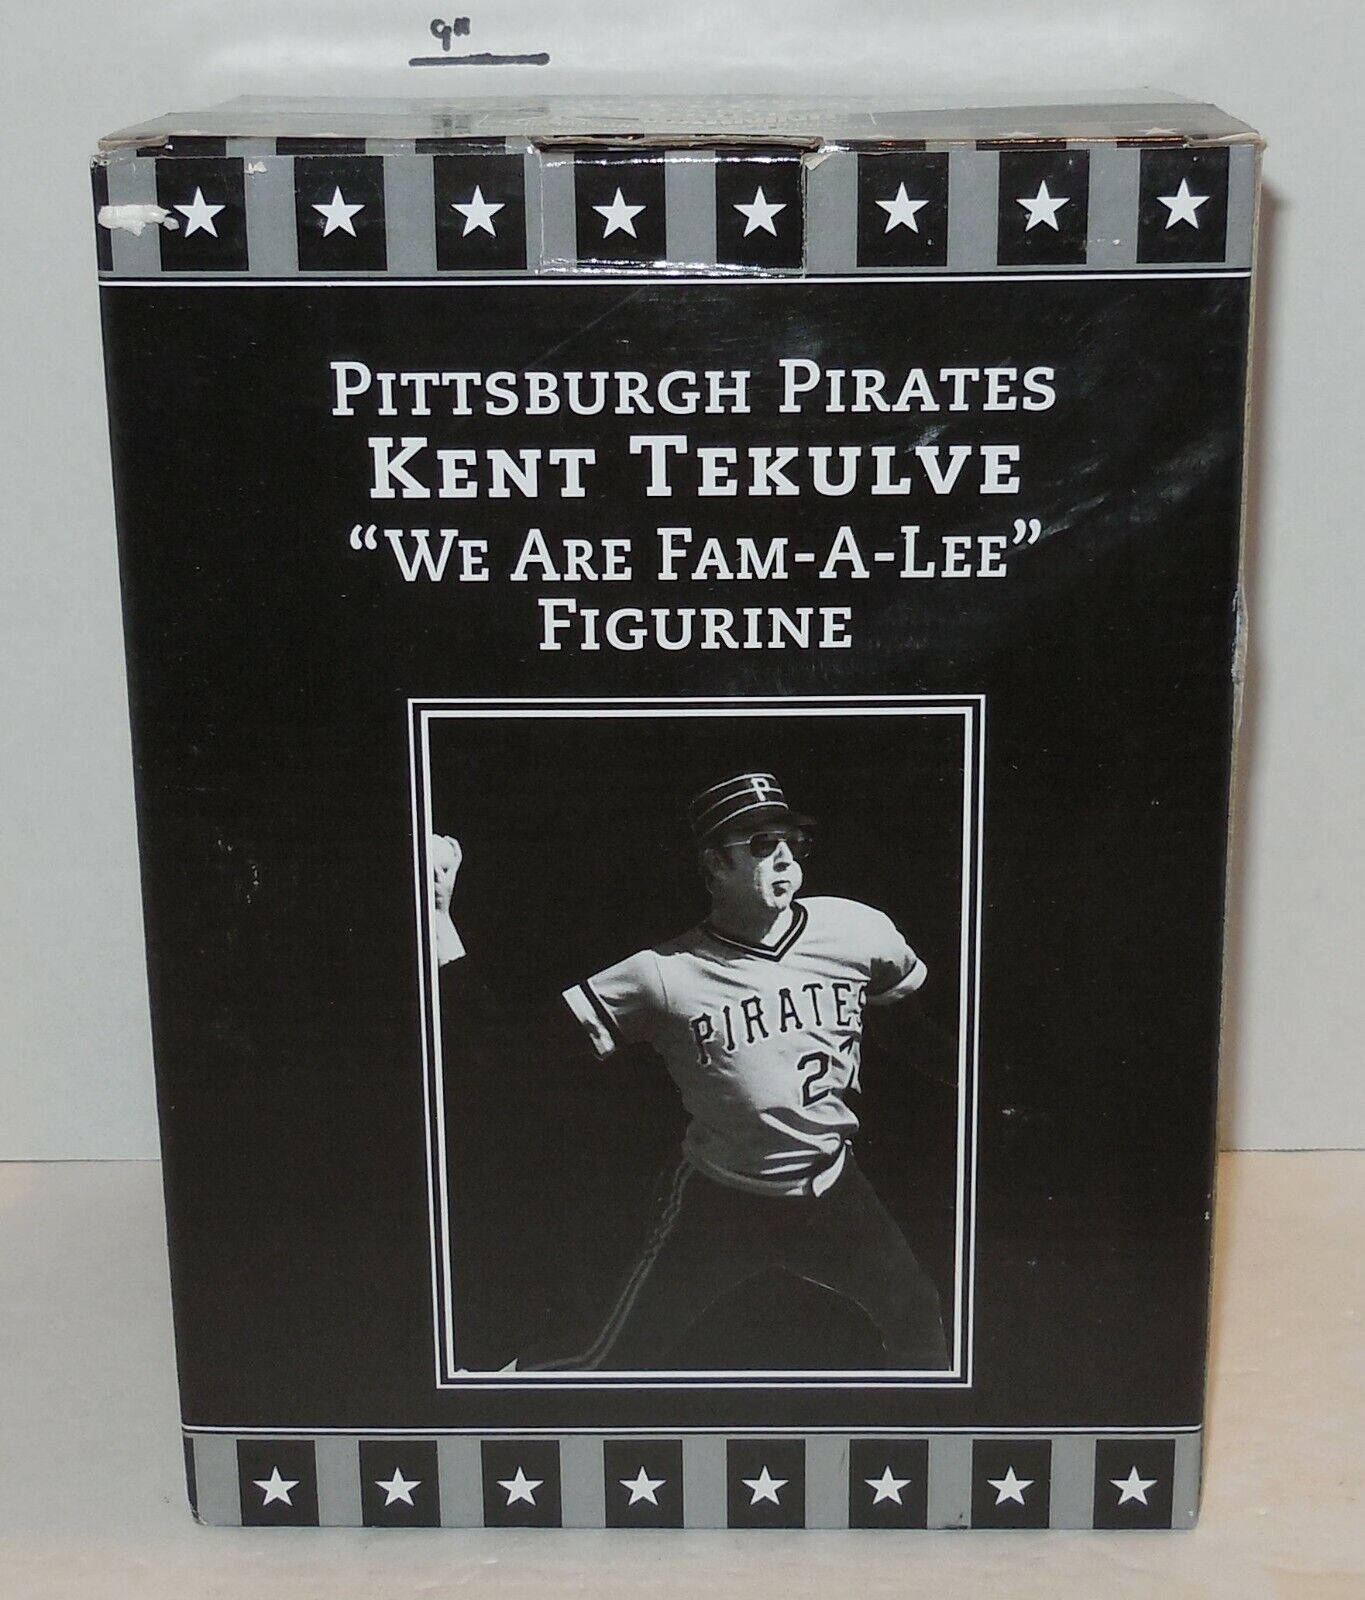 Primary image for Kent Tekulve PITTSBURGH PIRATES WE ARE FAM-A-LEE FIGURINE SGA 2004